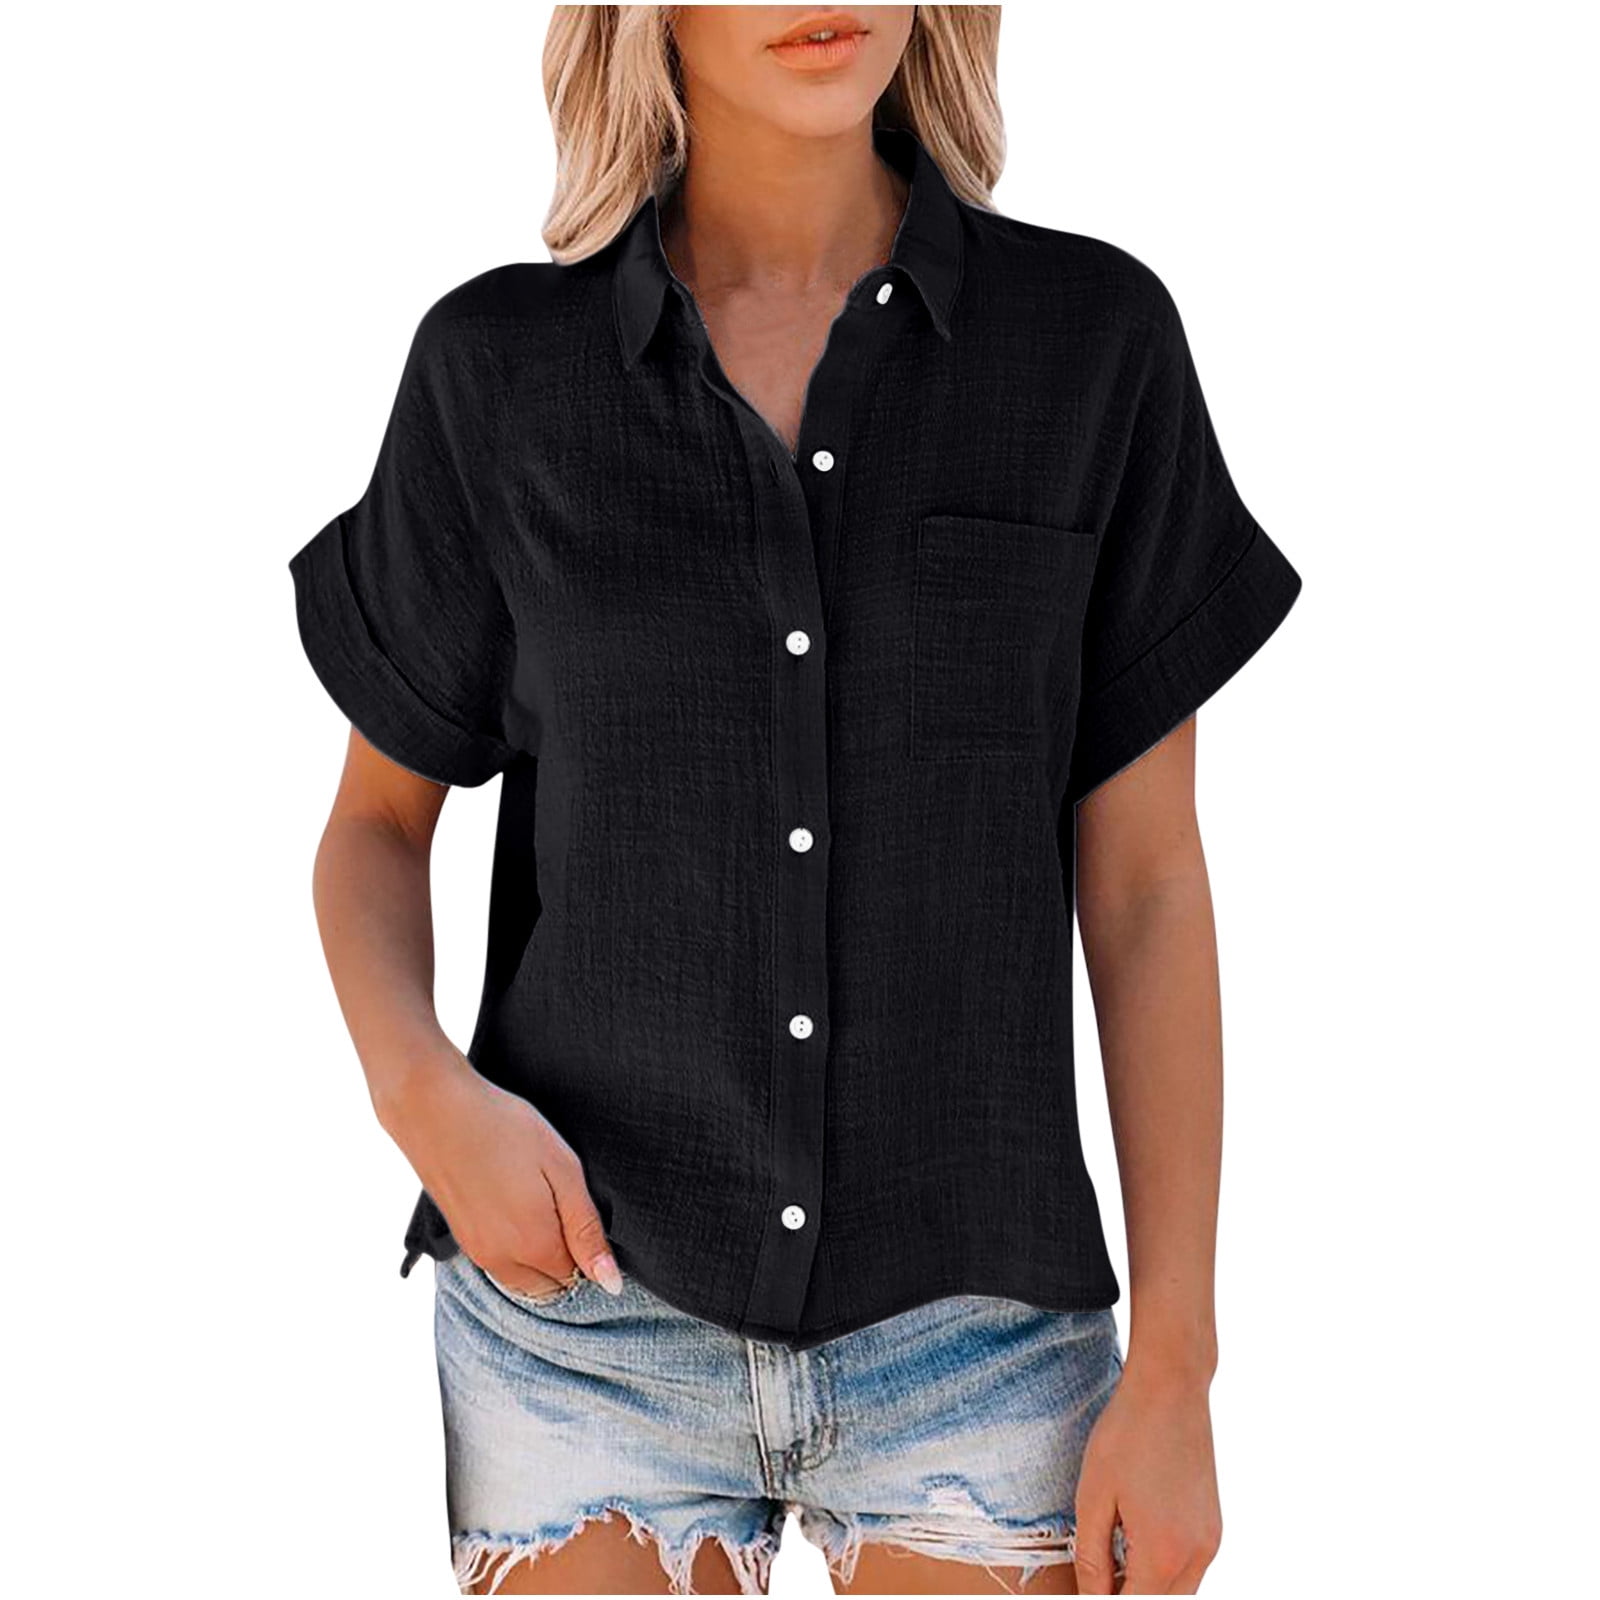 Ichuanyi Womens Cotton Button Down Shirt Casual Short Sleeve Loose Fit